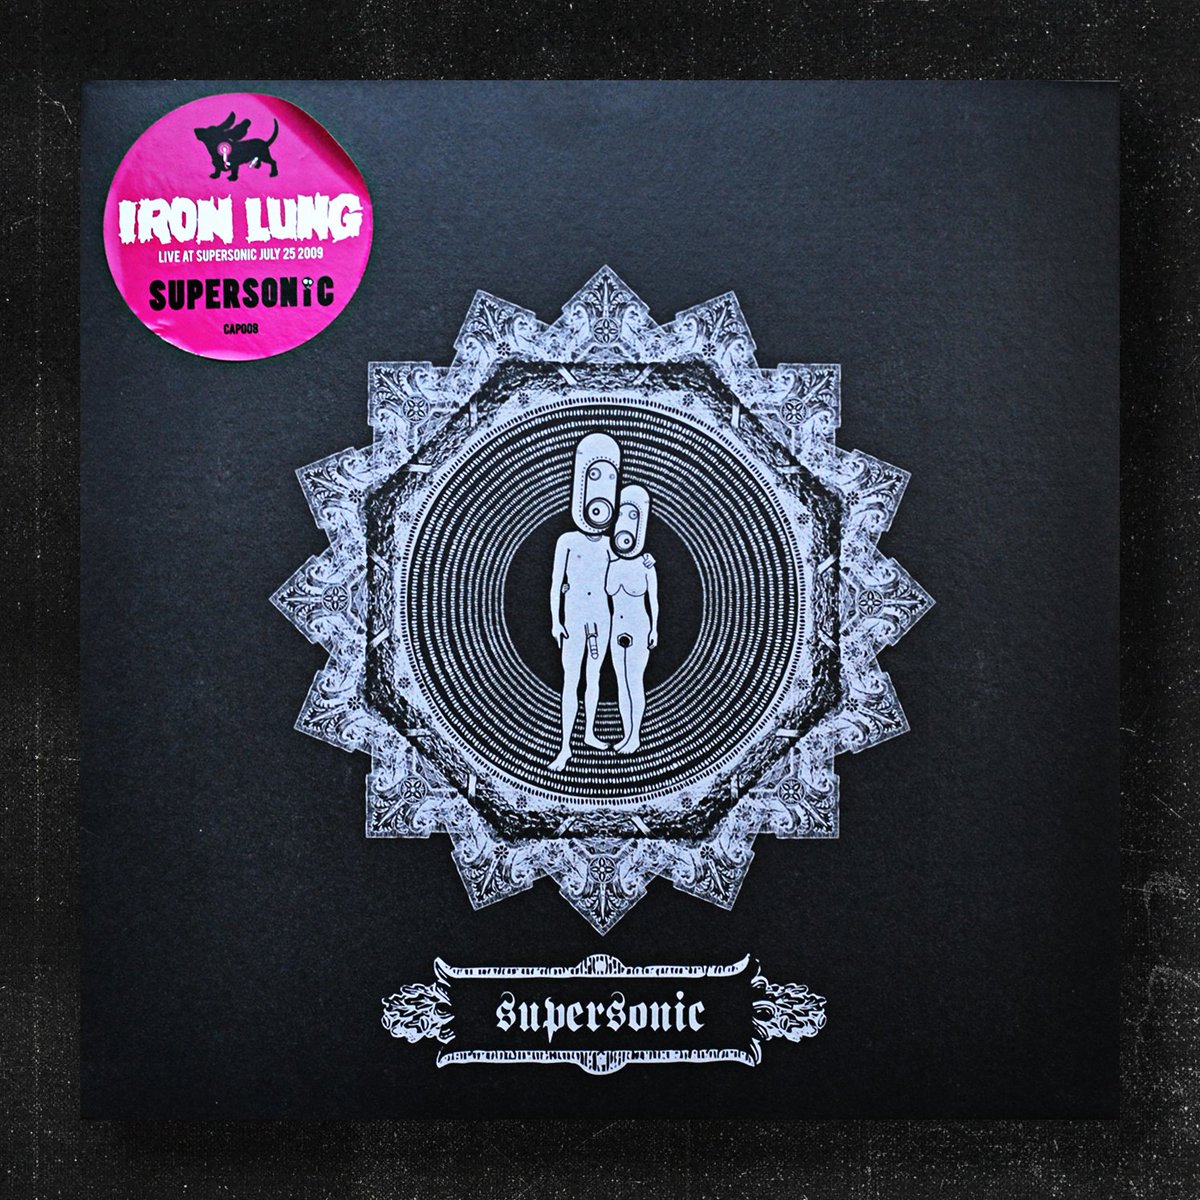 Iron Lung live at Supersonic 2009 LP 💥 Influenced by power violence and grindcore, the band formed in 1999 and have since developed their own brand of audio violence. Crushing hardcore paired with hilarious on-stage banter is available on vinyl from supersonicfestival.com